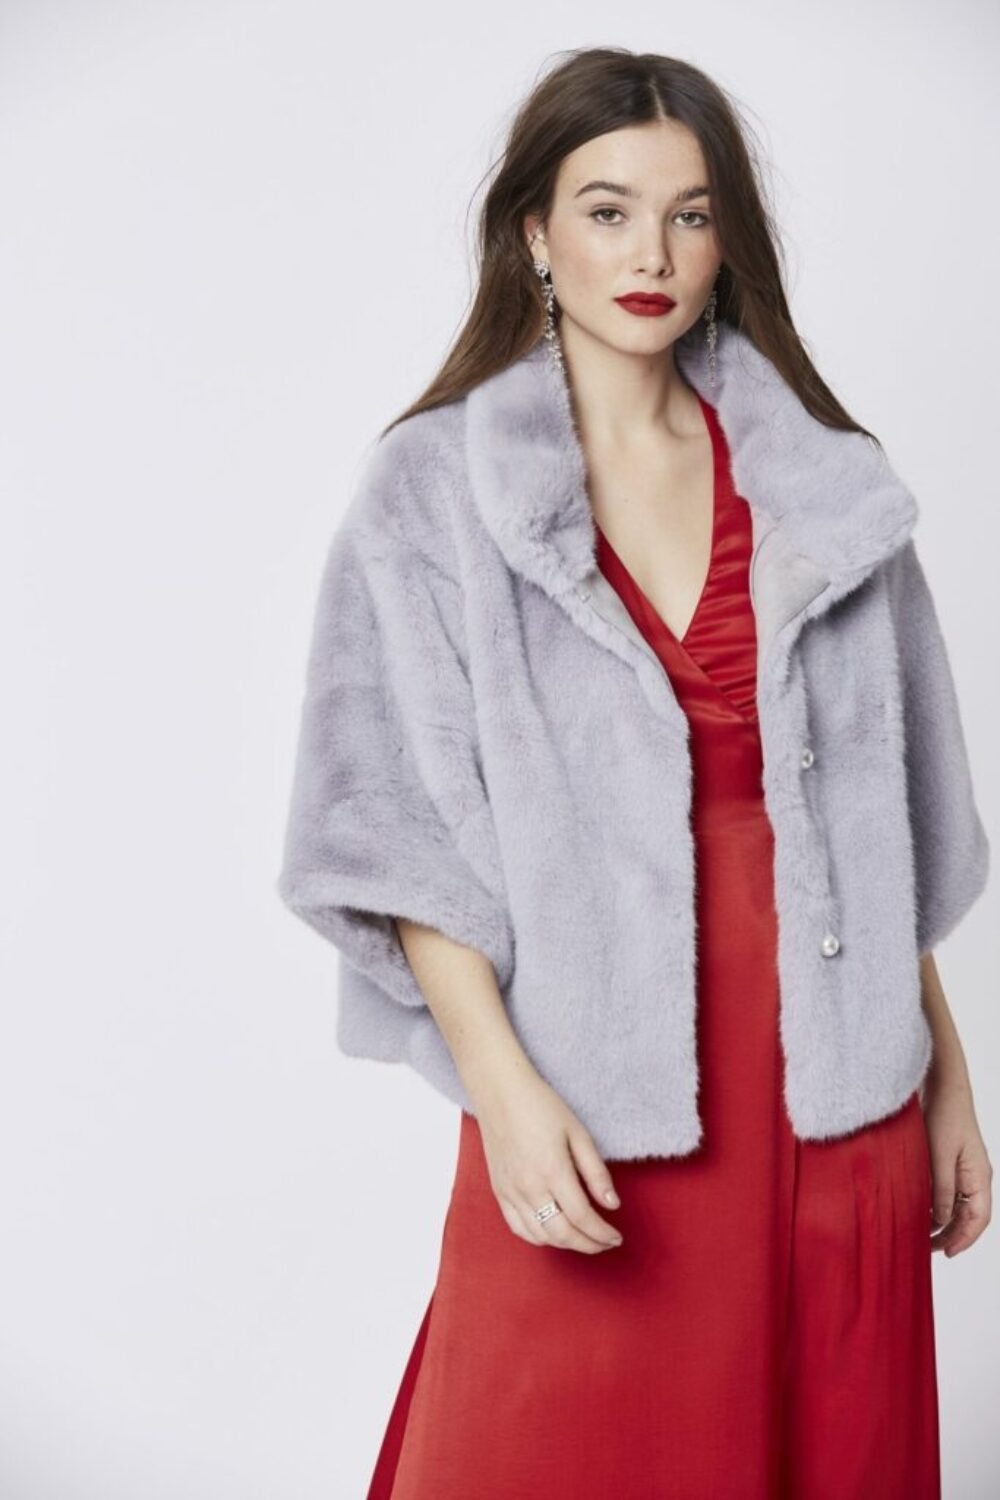 Shop Lux Grey Faux Fur Jacket With Pearls and women's luxury and designer clothes at www.lux-apparel.co.uk